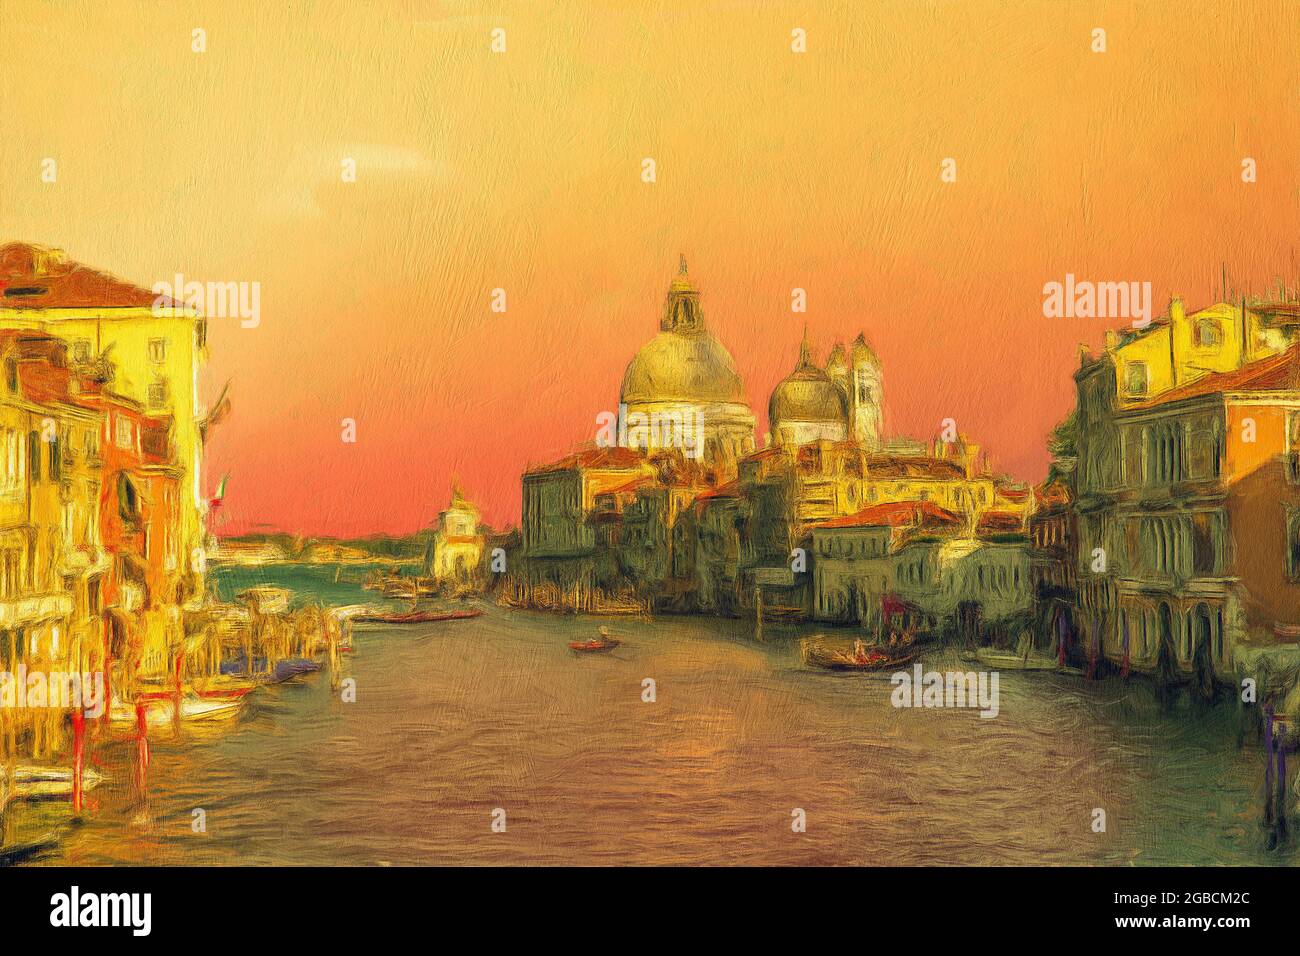 The grand canal Venice towards the Basilica Santa Maria della Salute, given a painted and textured effect Stock Photo